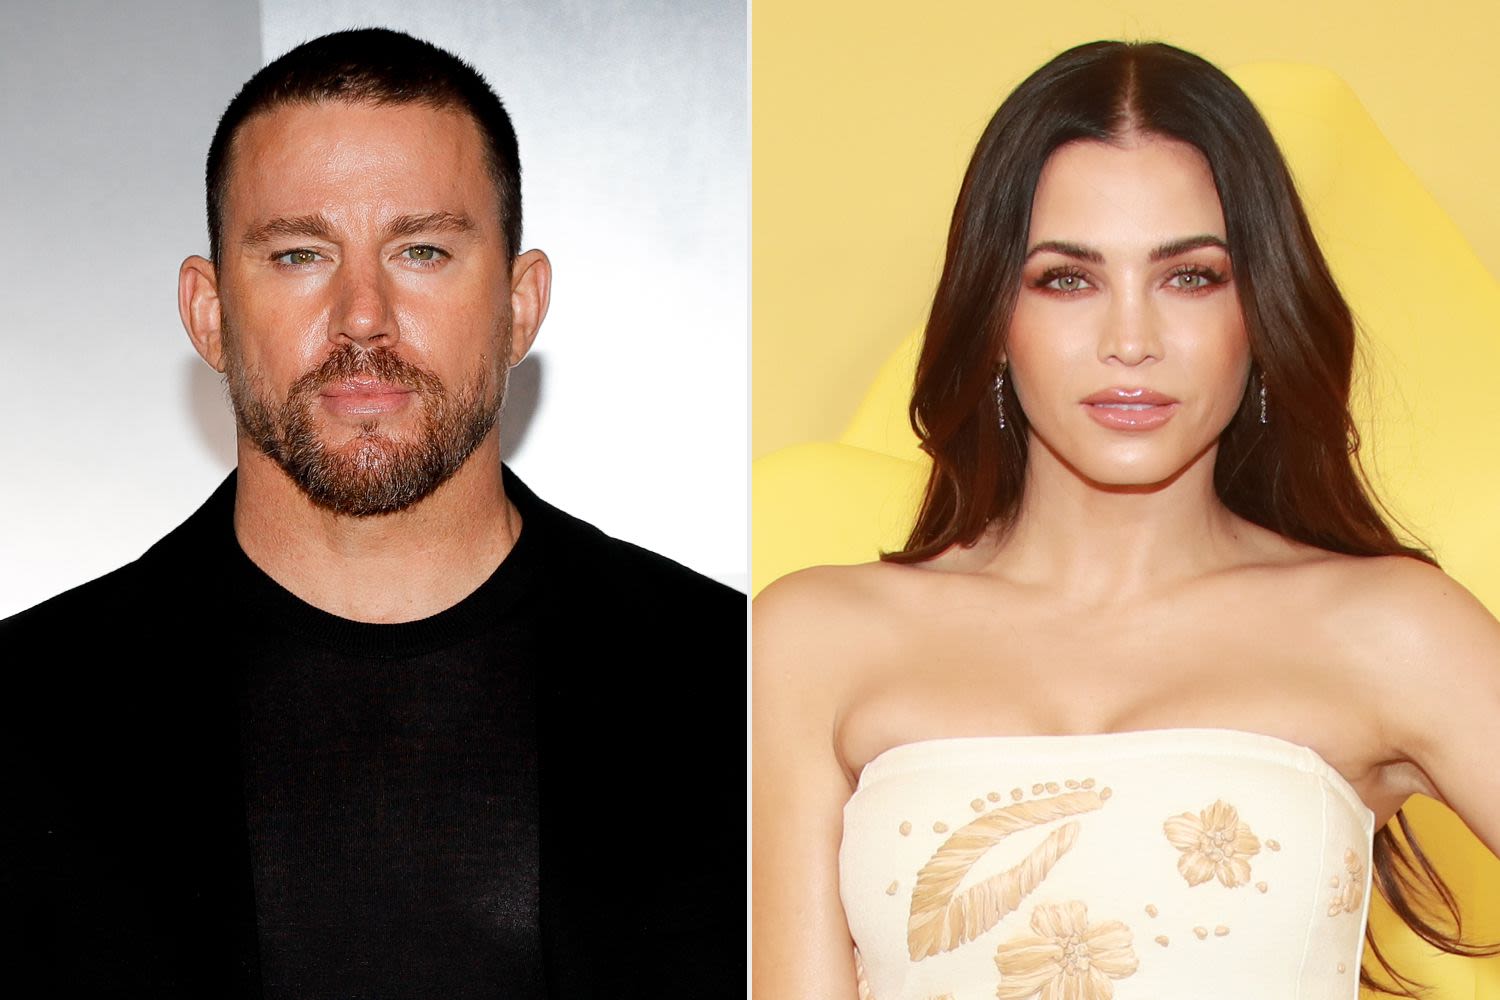 Channing Tatum Denies Ex Jenna Dewan's Claims He's Hiding Assets as She Maintains 'Facts Are on Her Side'